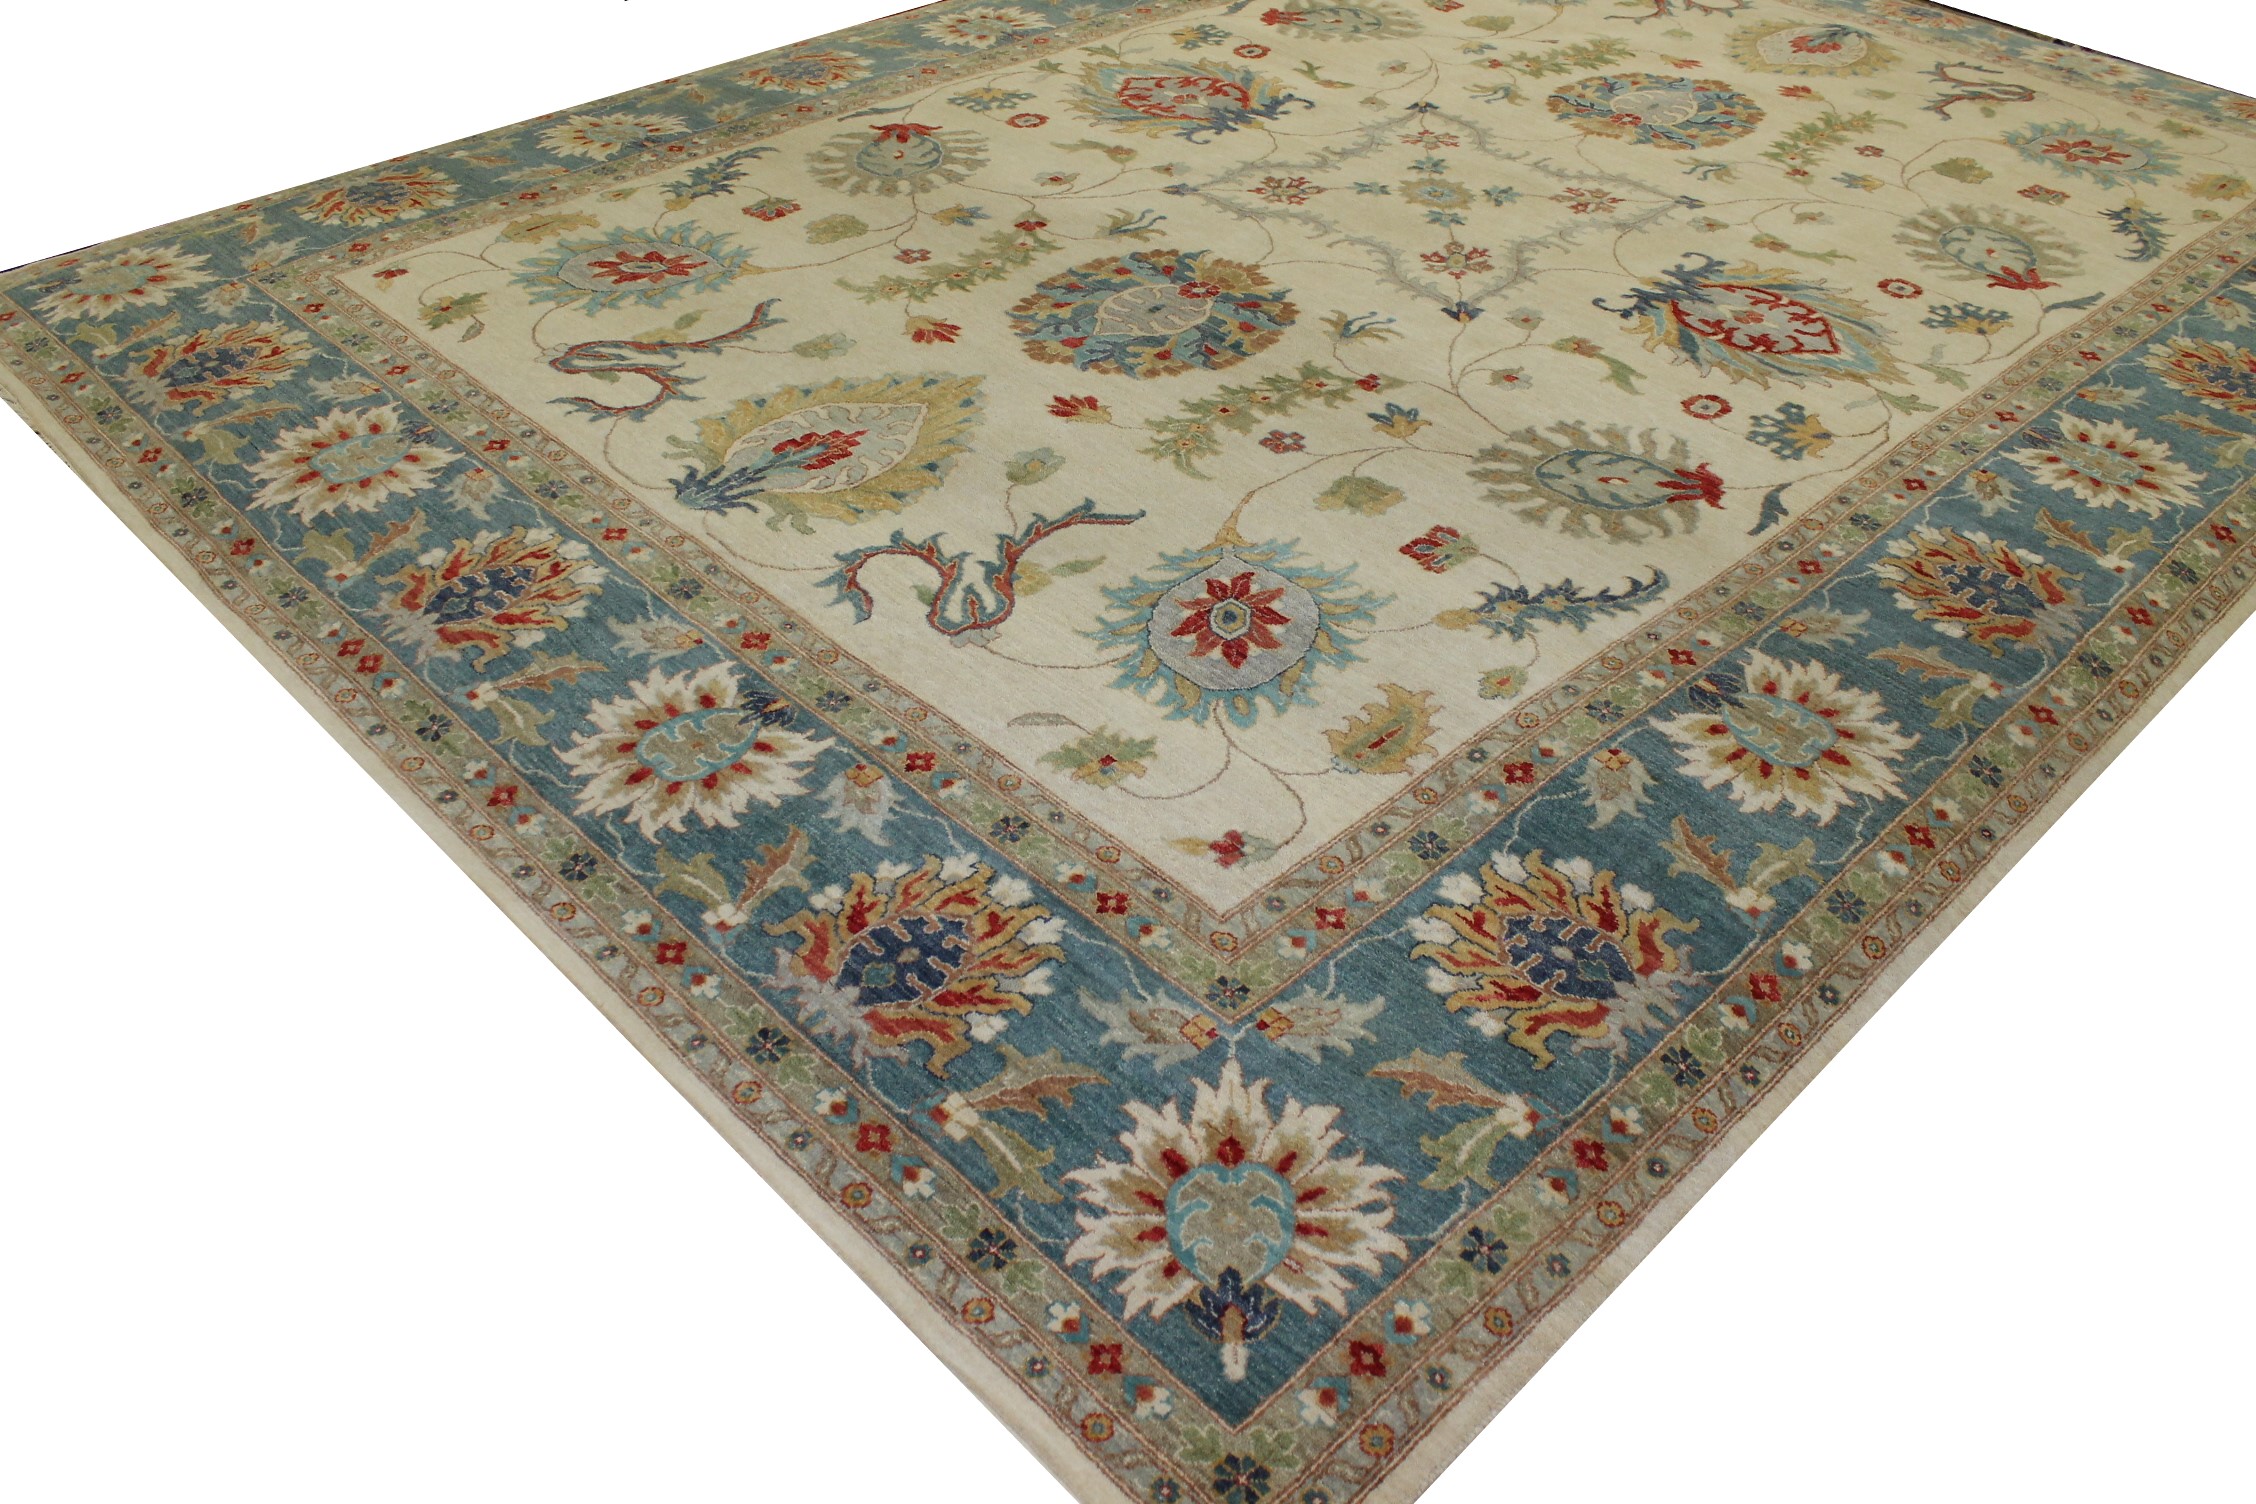 10x14 Oriental Hand Knotted Wool Area Rug - MR023191